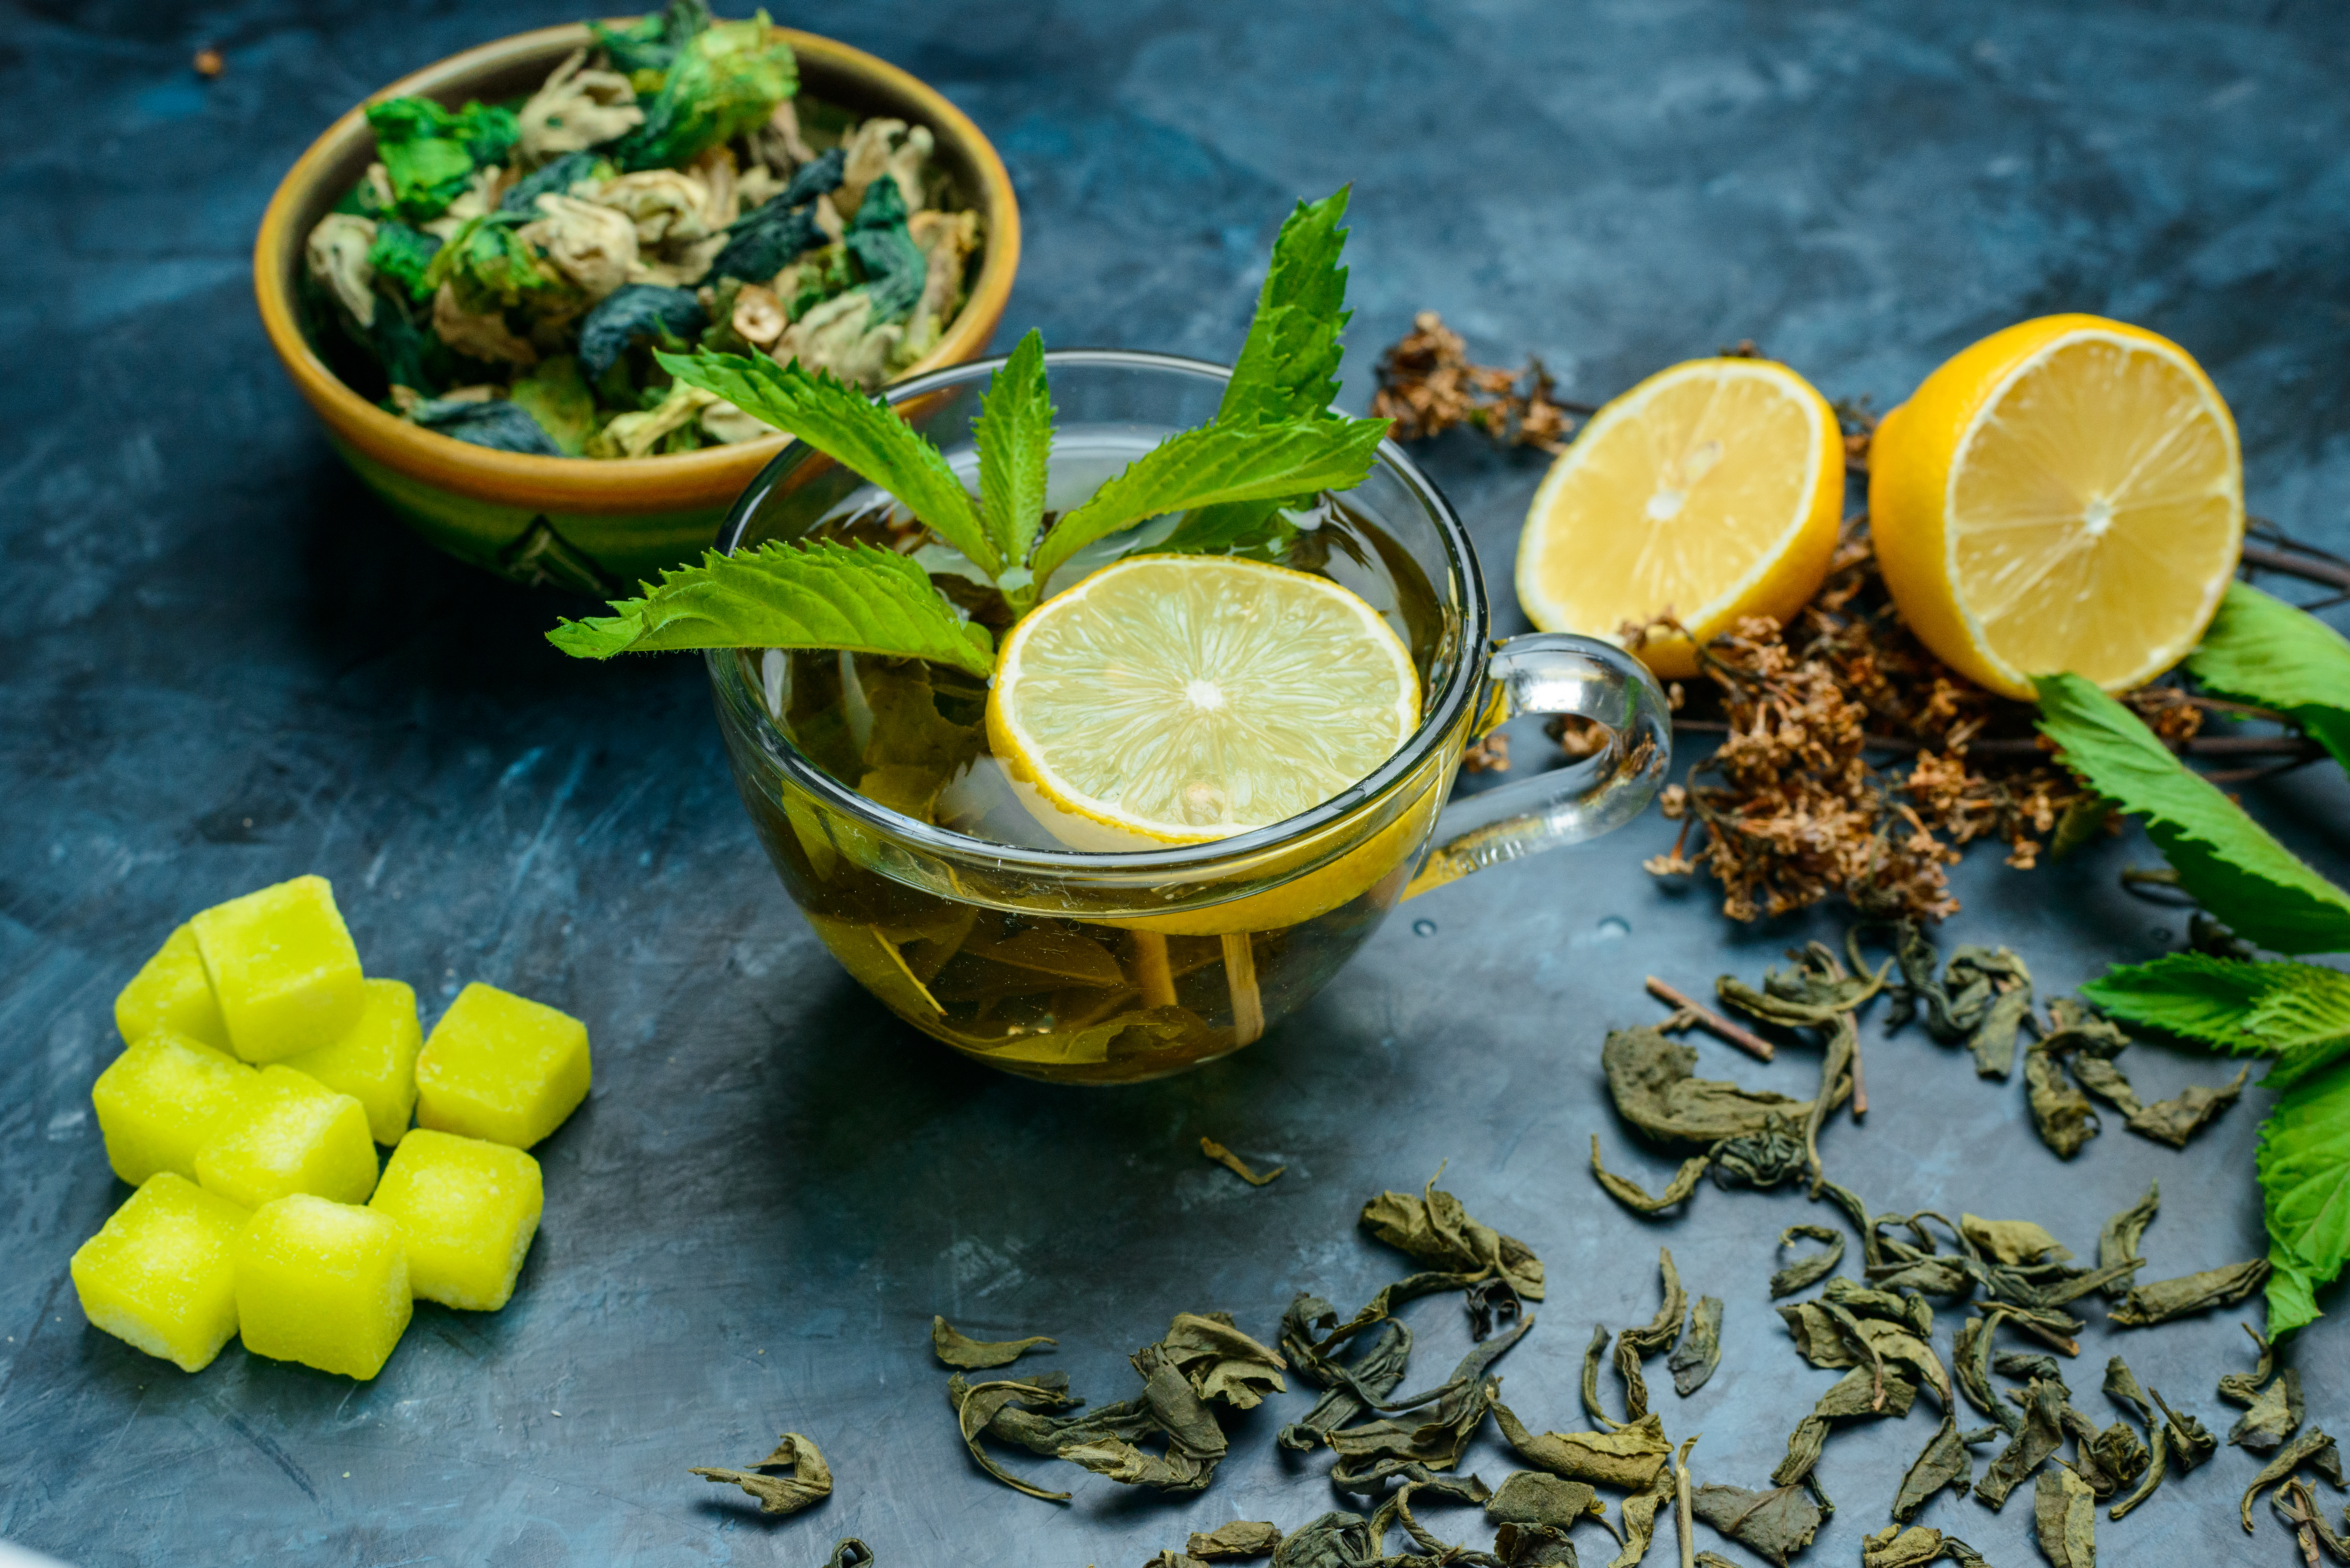 tea-cup-with-mint-dried-herbs-lemon-sugar-cubes-high-angle-view-blue-surface